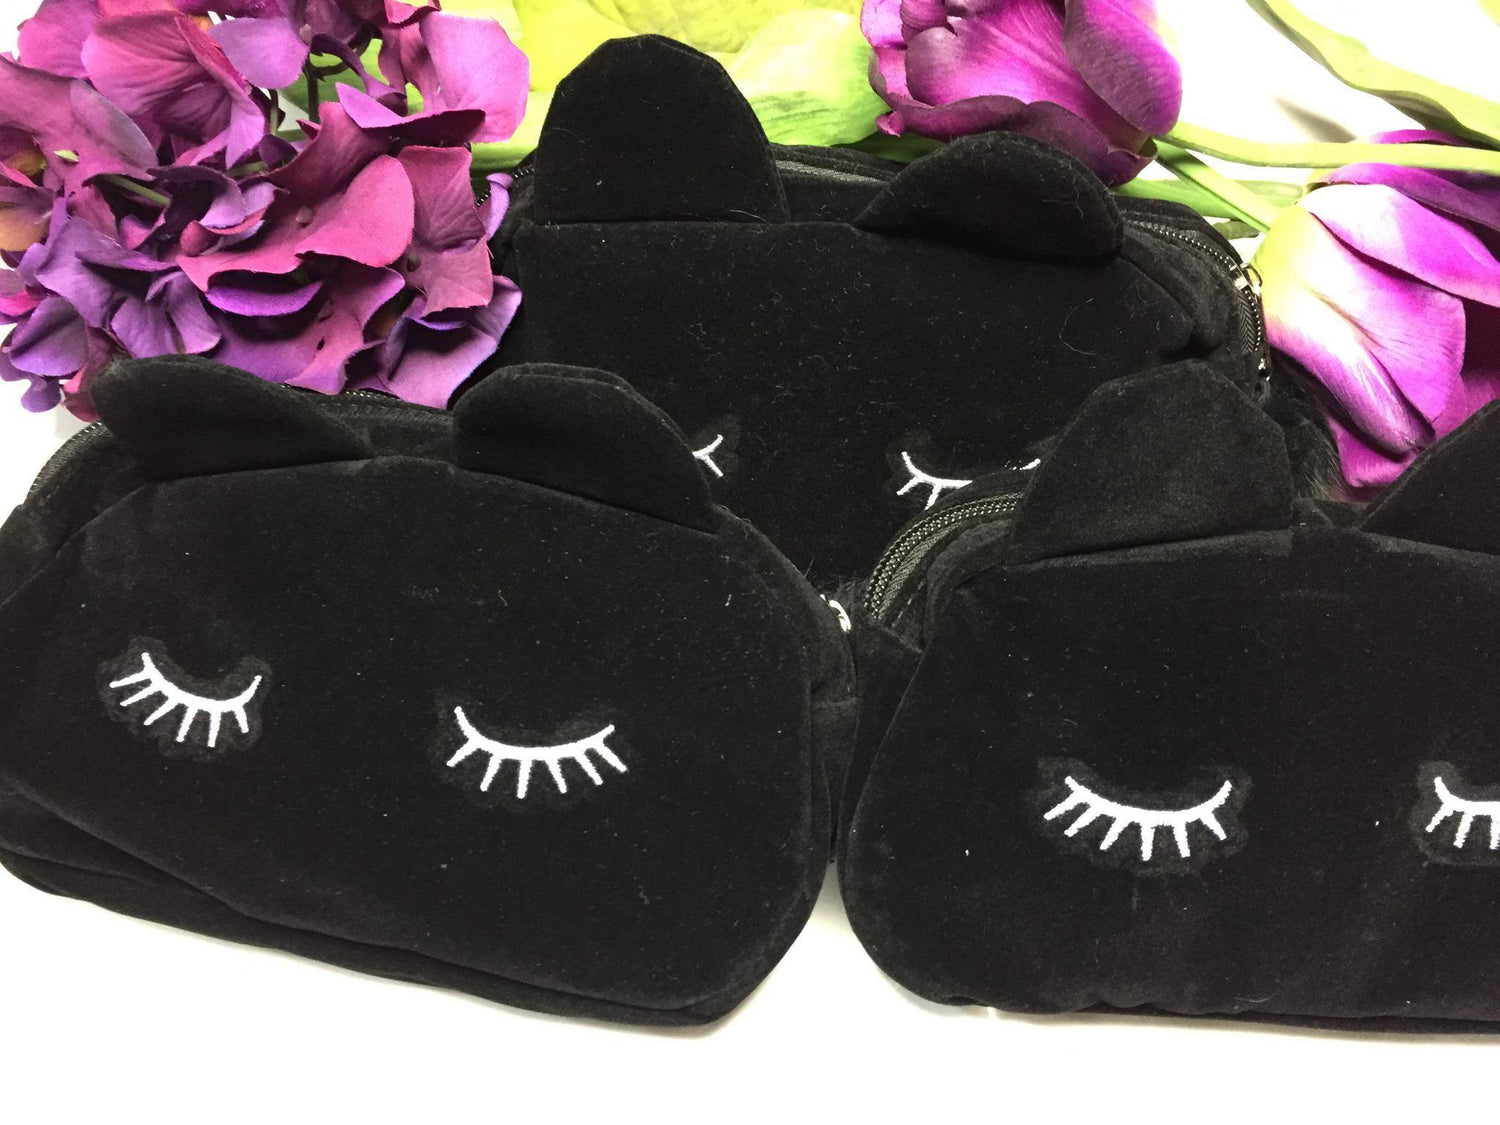 Black Cat Lashes Makeup bag with ears and tail